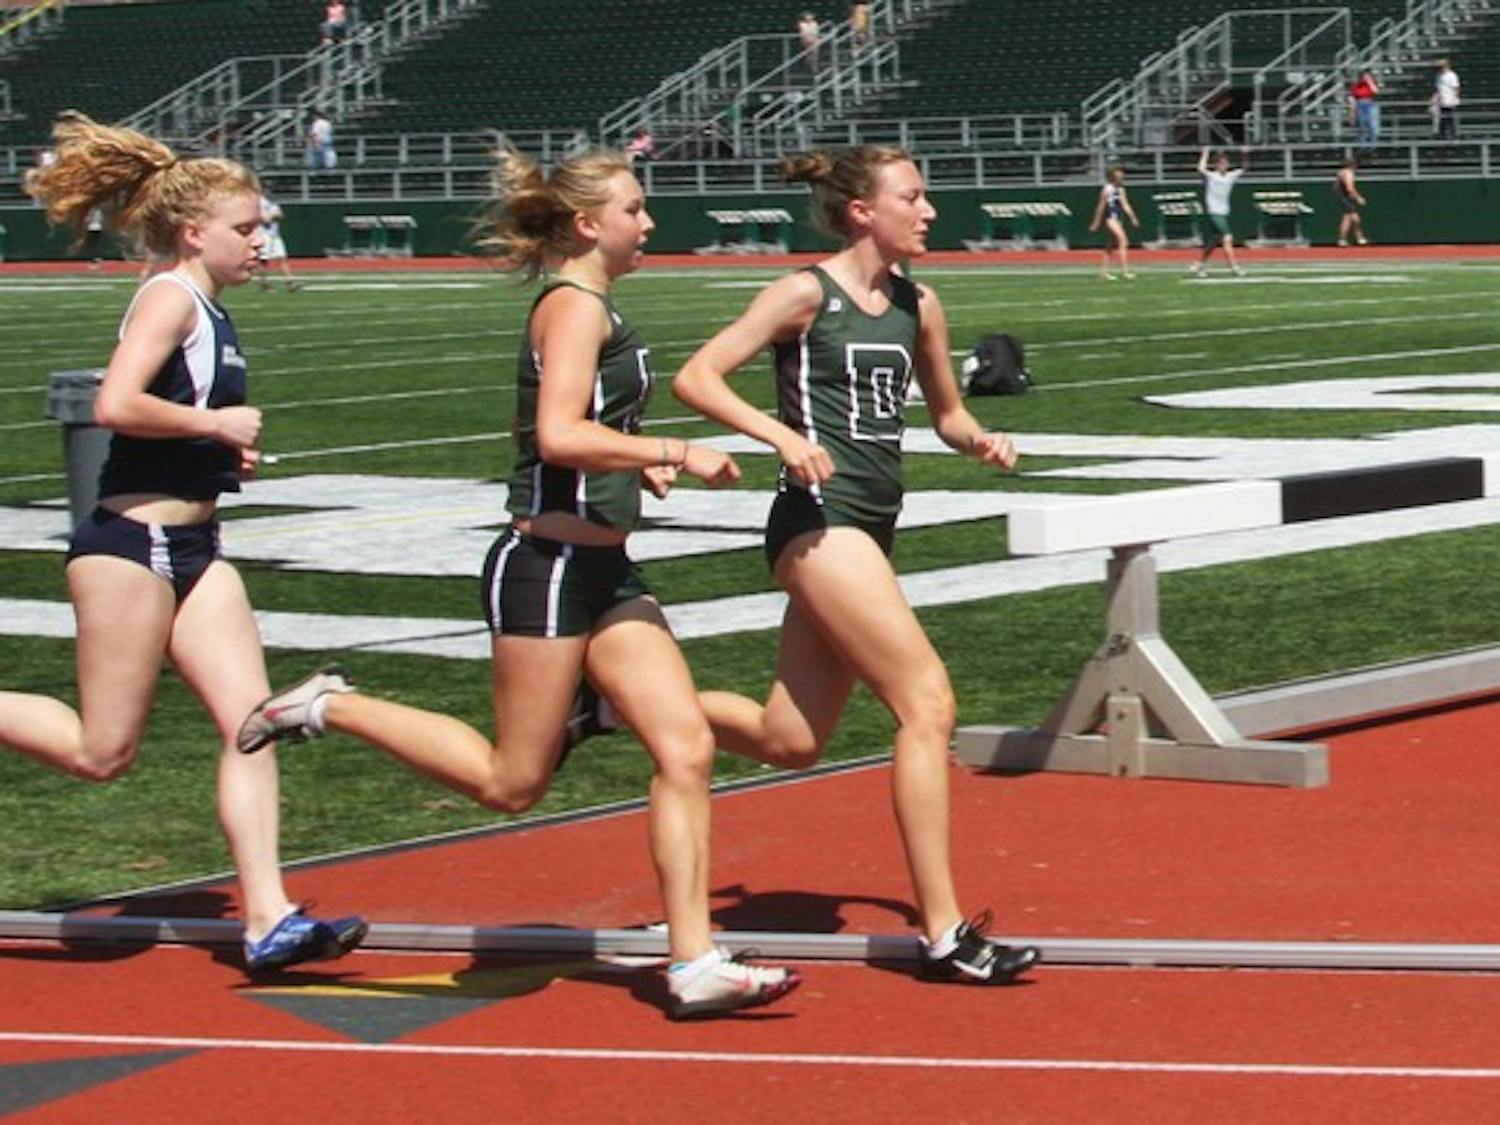 The Dartmouth track and field teams wrapped up their outdoor season with improved scores at Heps.